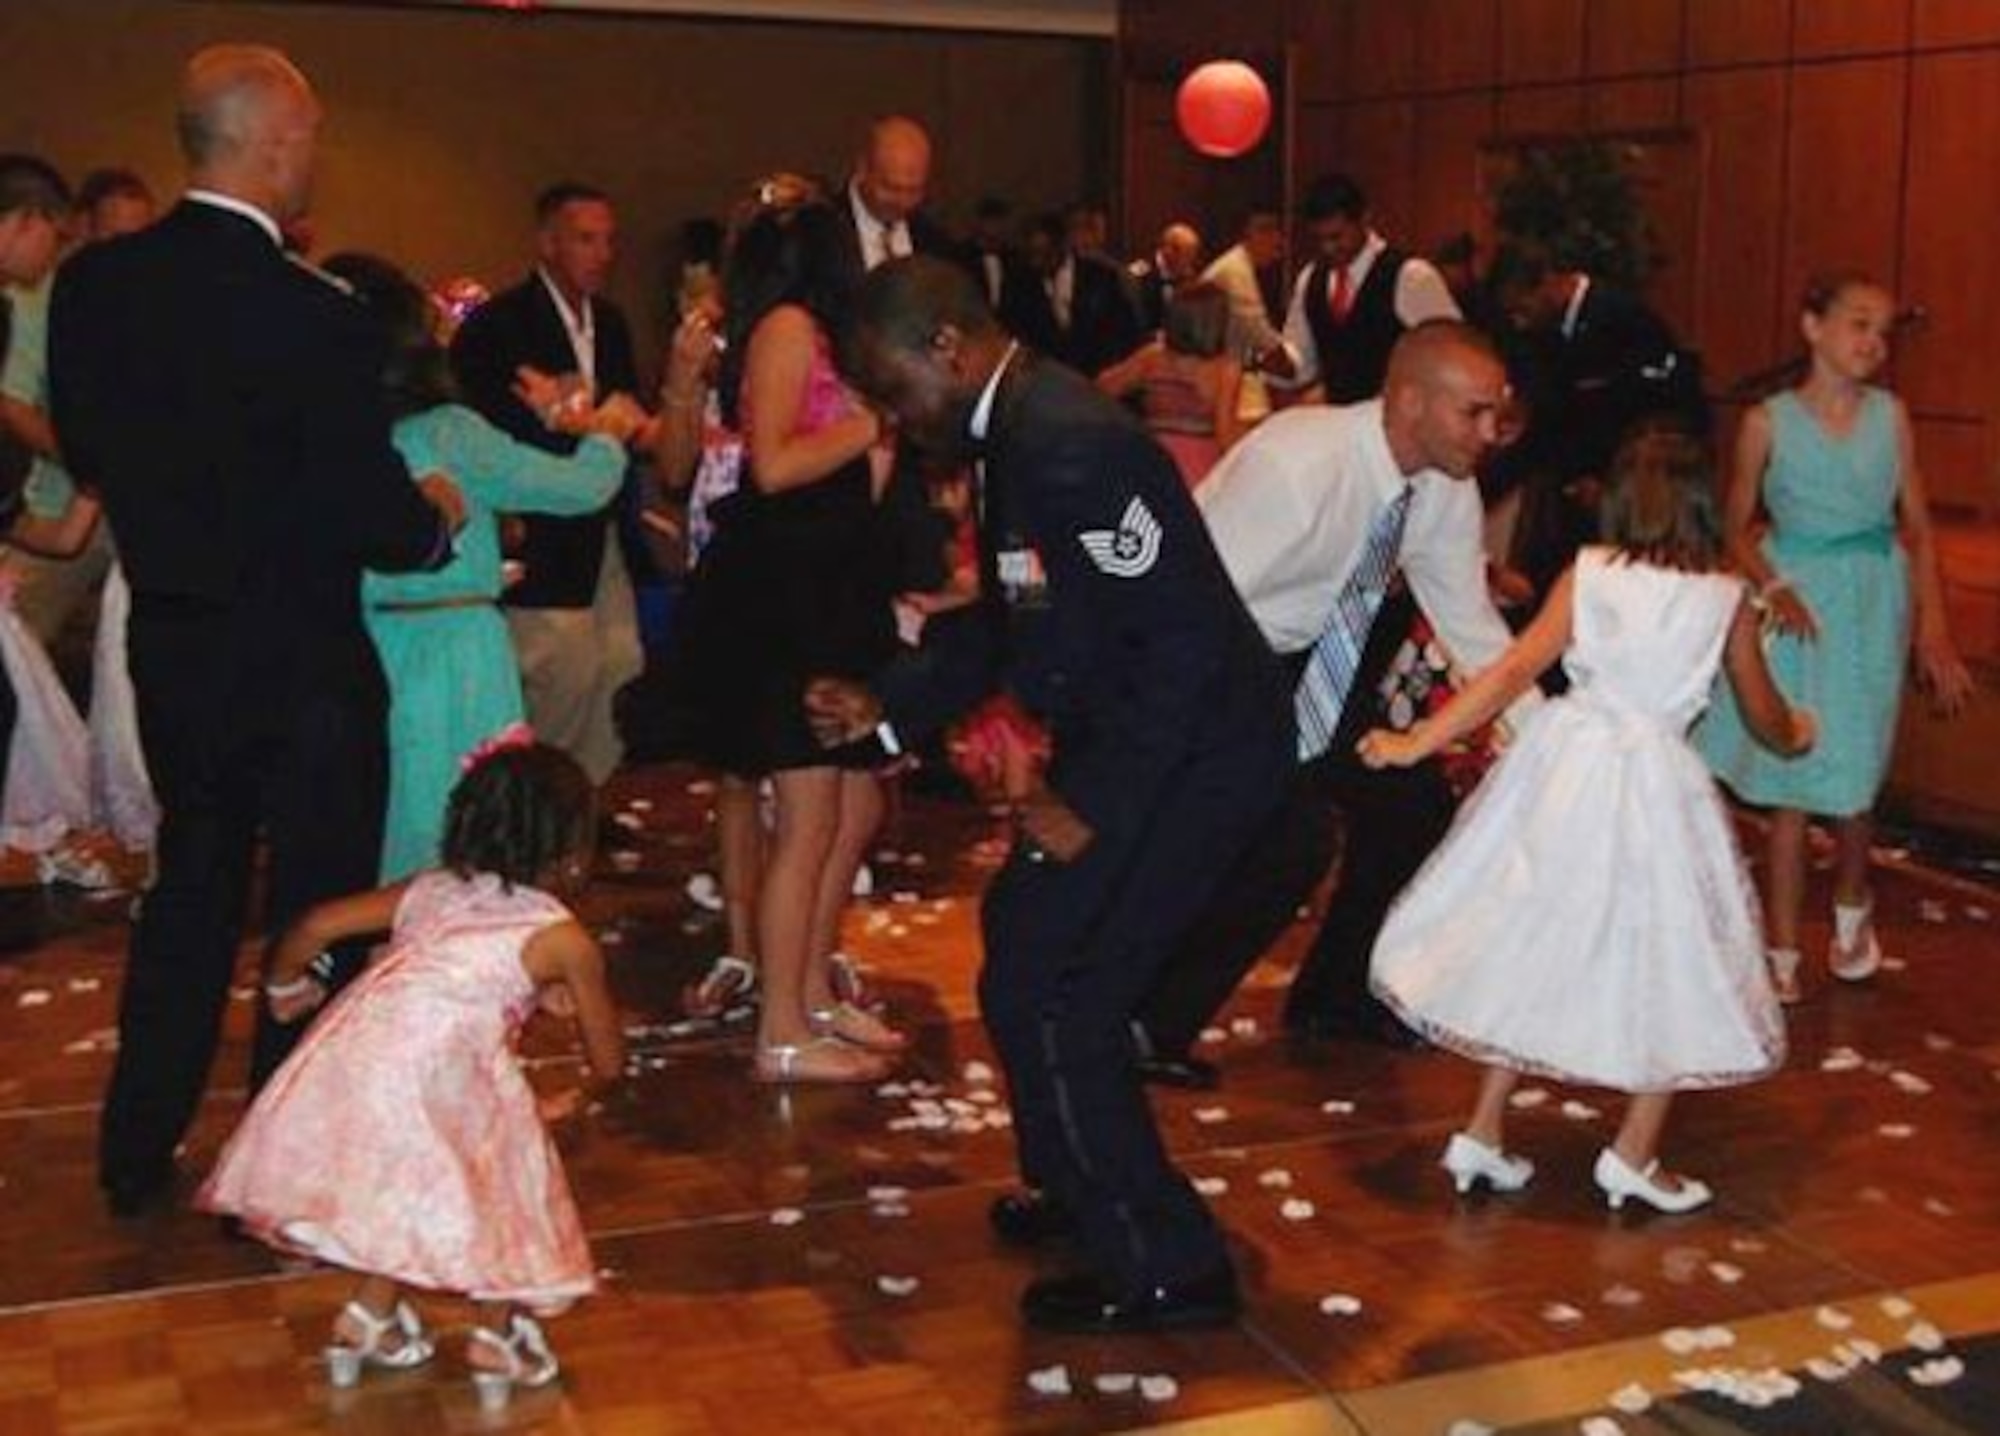 Family events, like Daddy Daughter Dances, are often held at Air Force clubs around the globe. (U.S. Air Force courtesy photo)